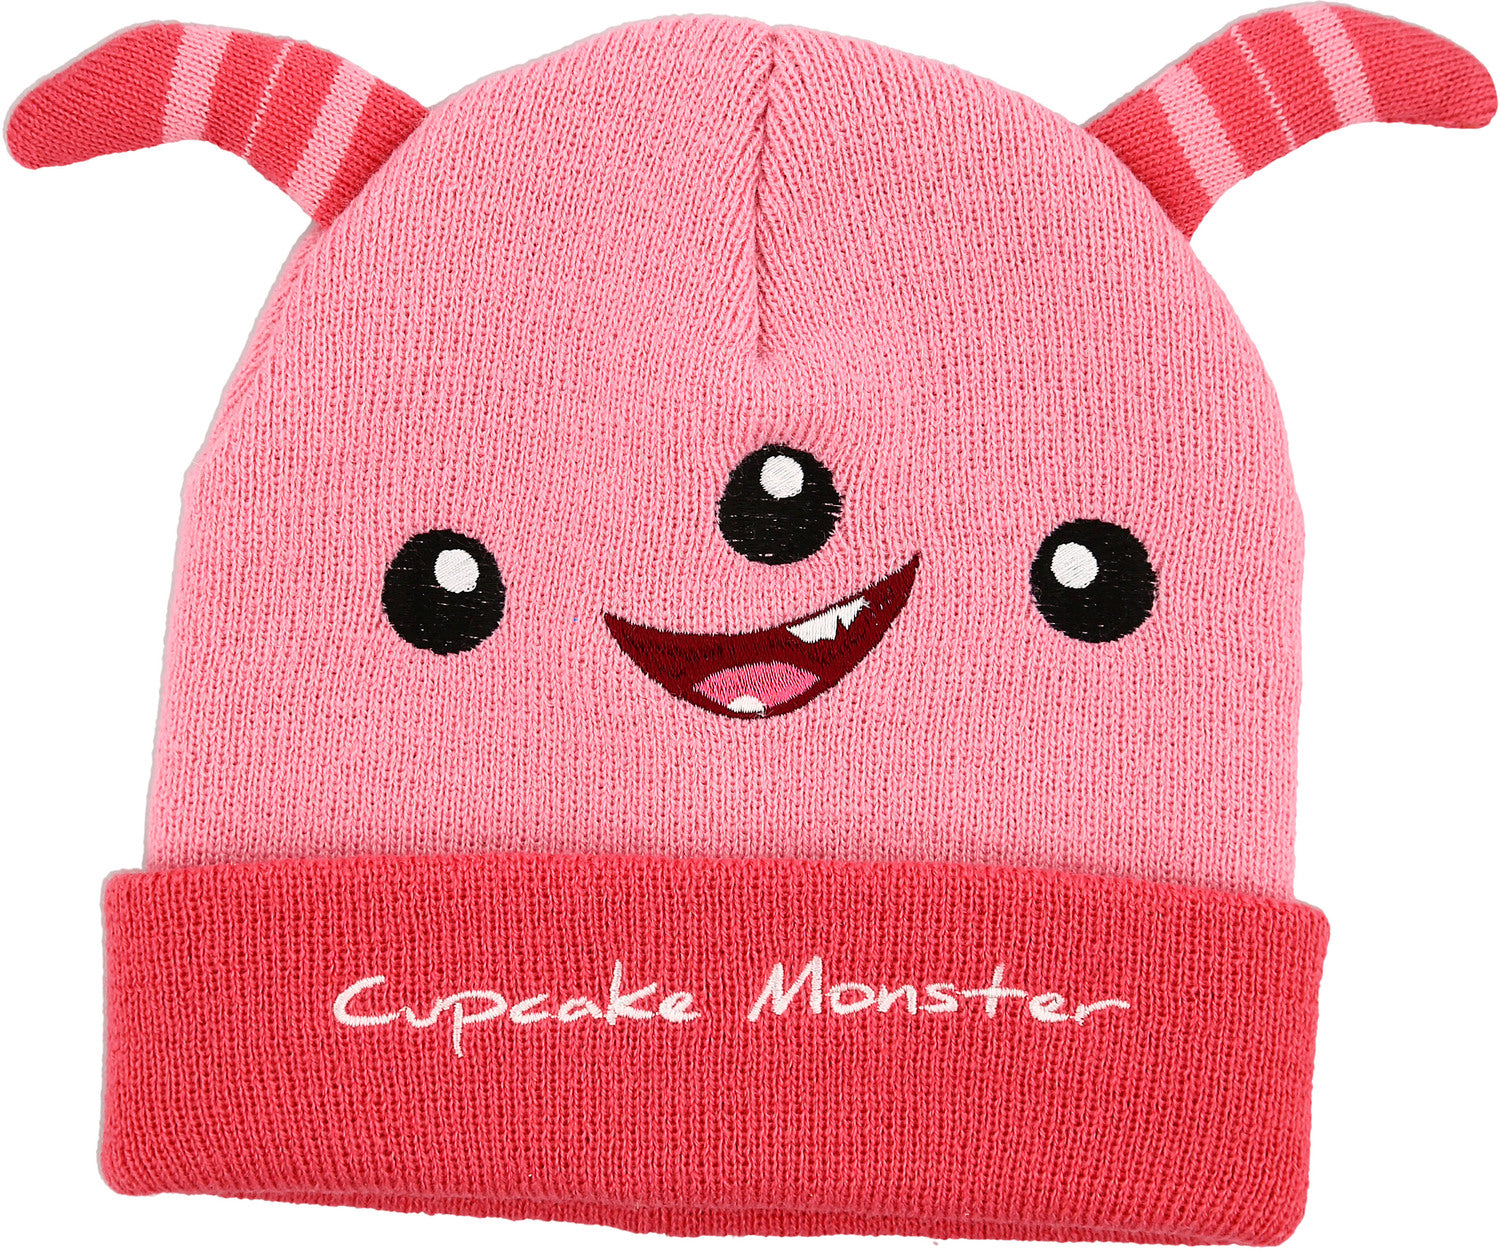 Cupcake Monster Baby Hat by Monster Munchkins